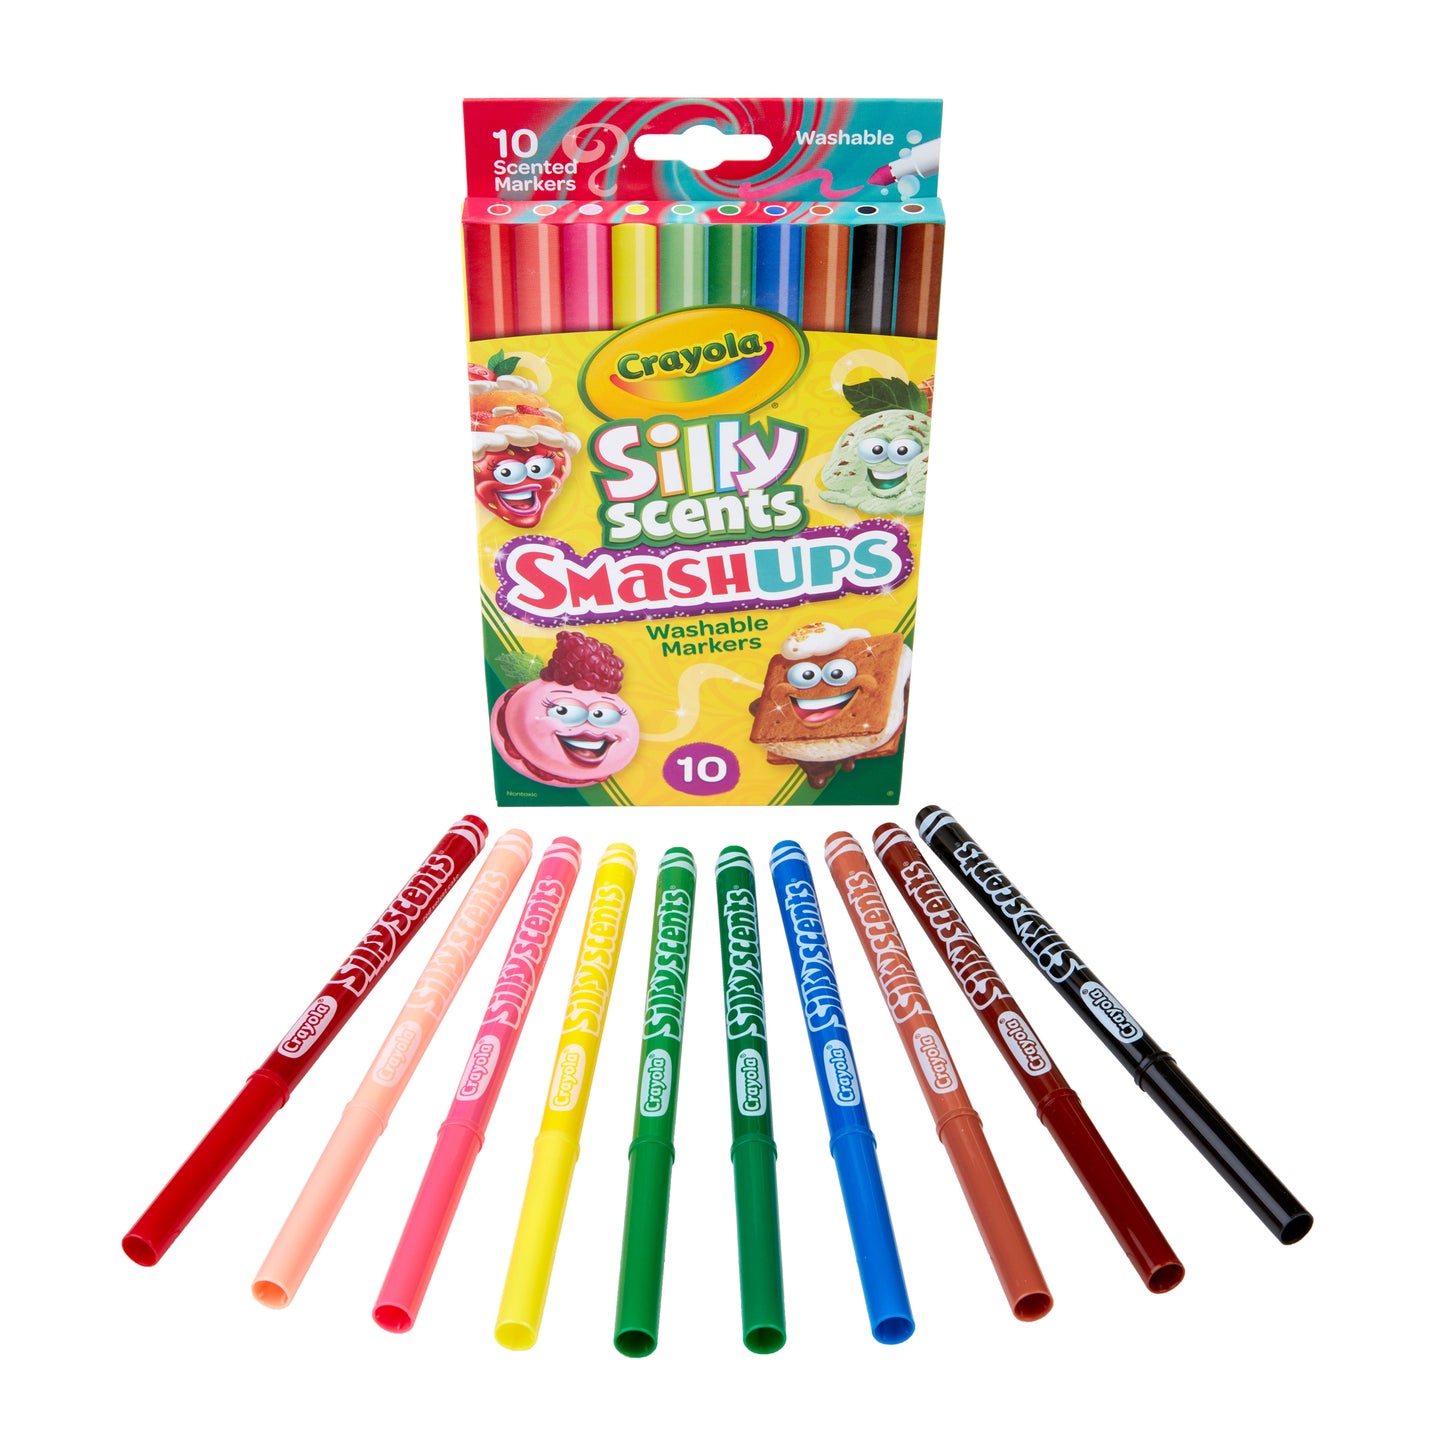 Silly Scents™ Smash Ups Slim Washable Scented Markers, 10 Per Pack, 6 Packs